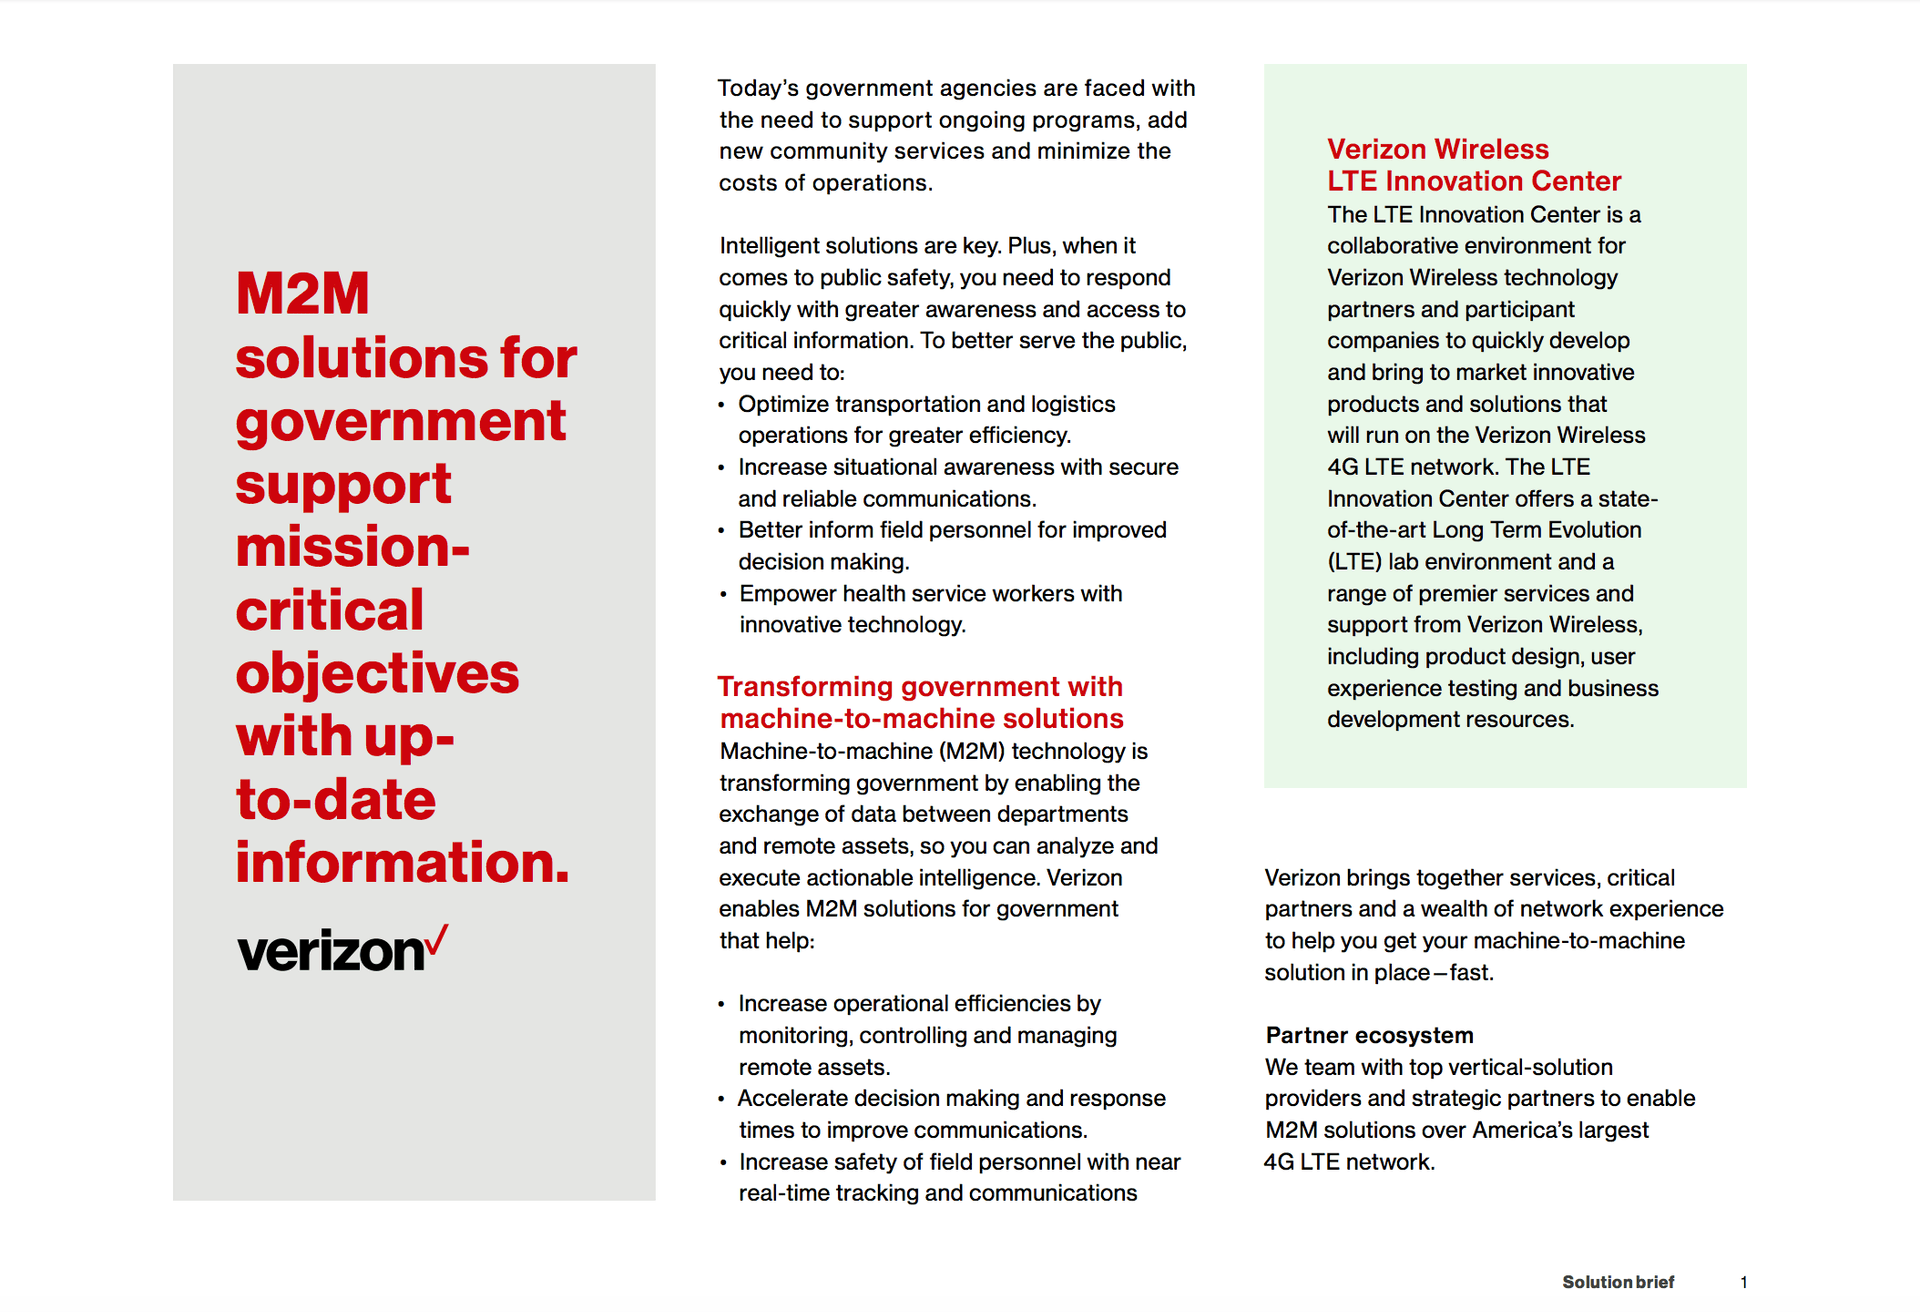 M2M Solutions for Government